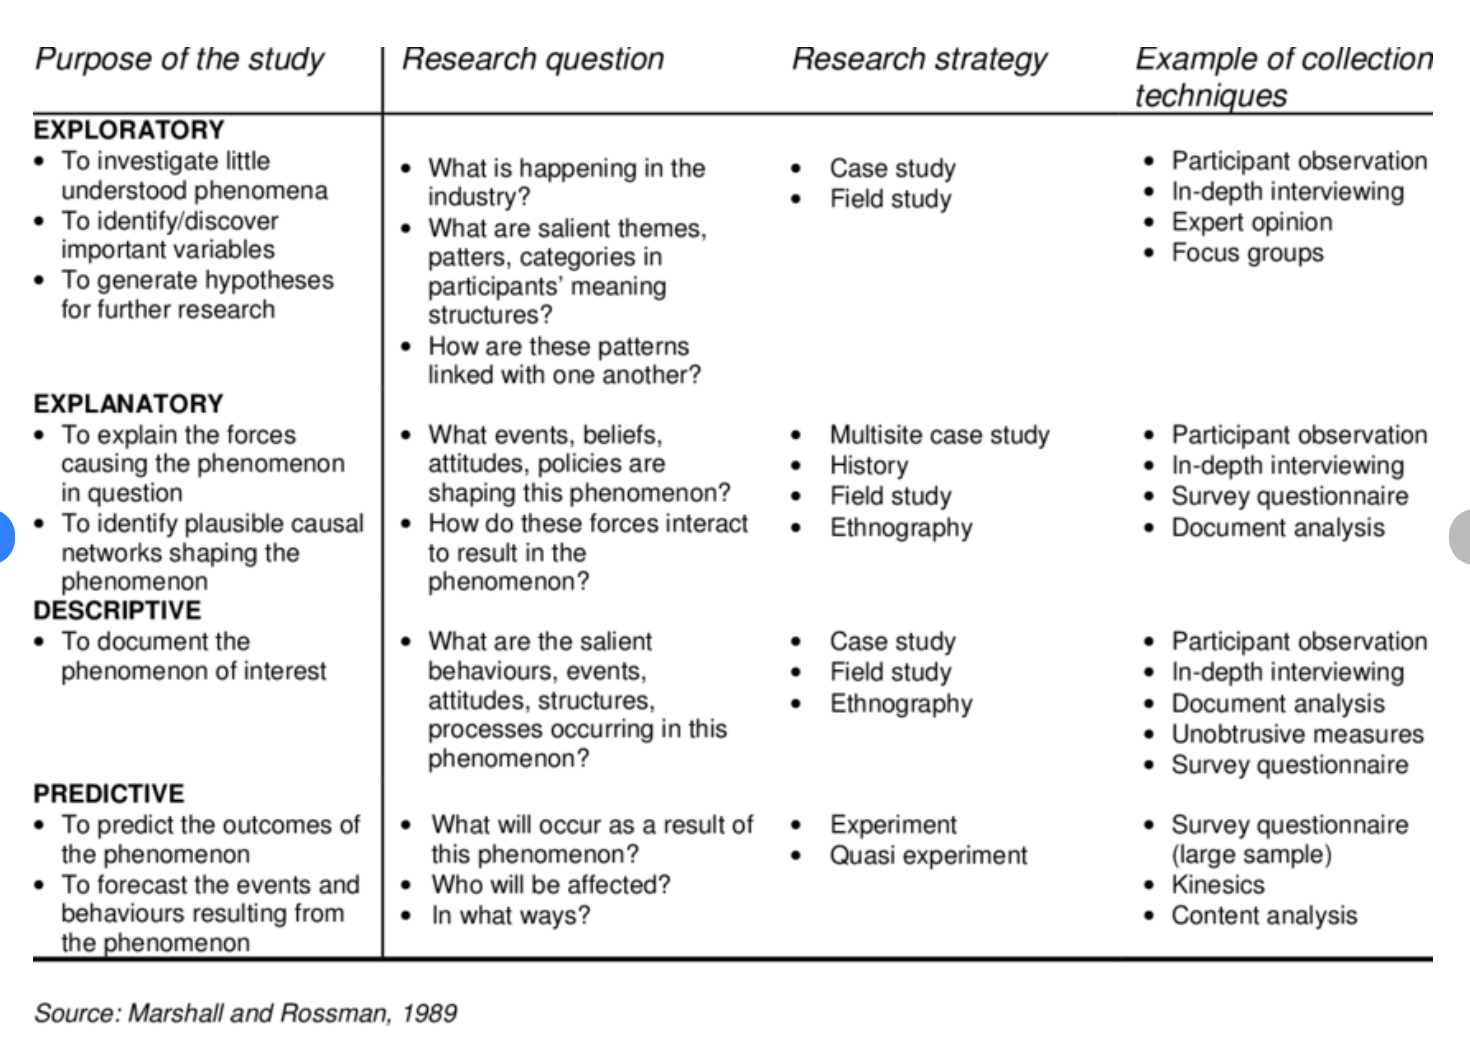 qualitative research uses research questions and quantitative research uses propositions